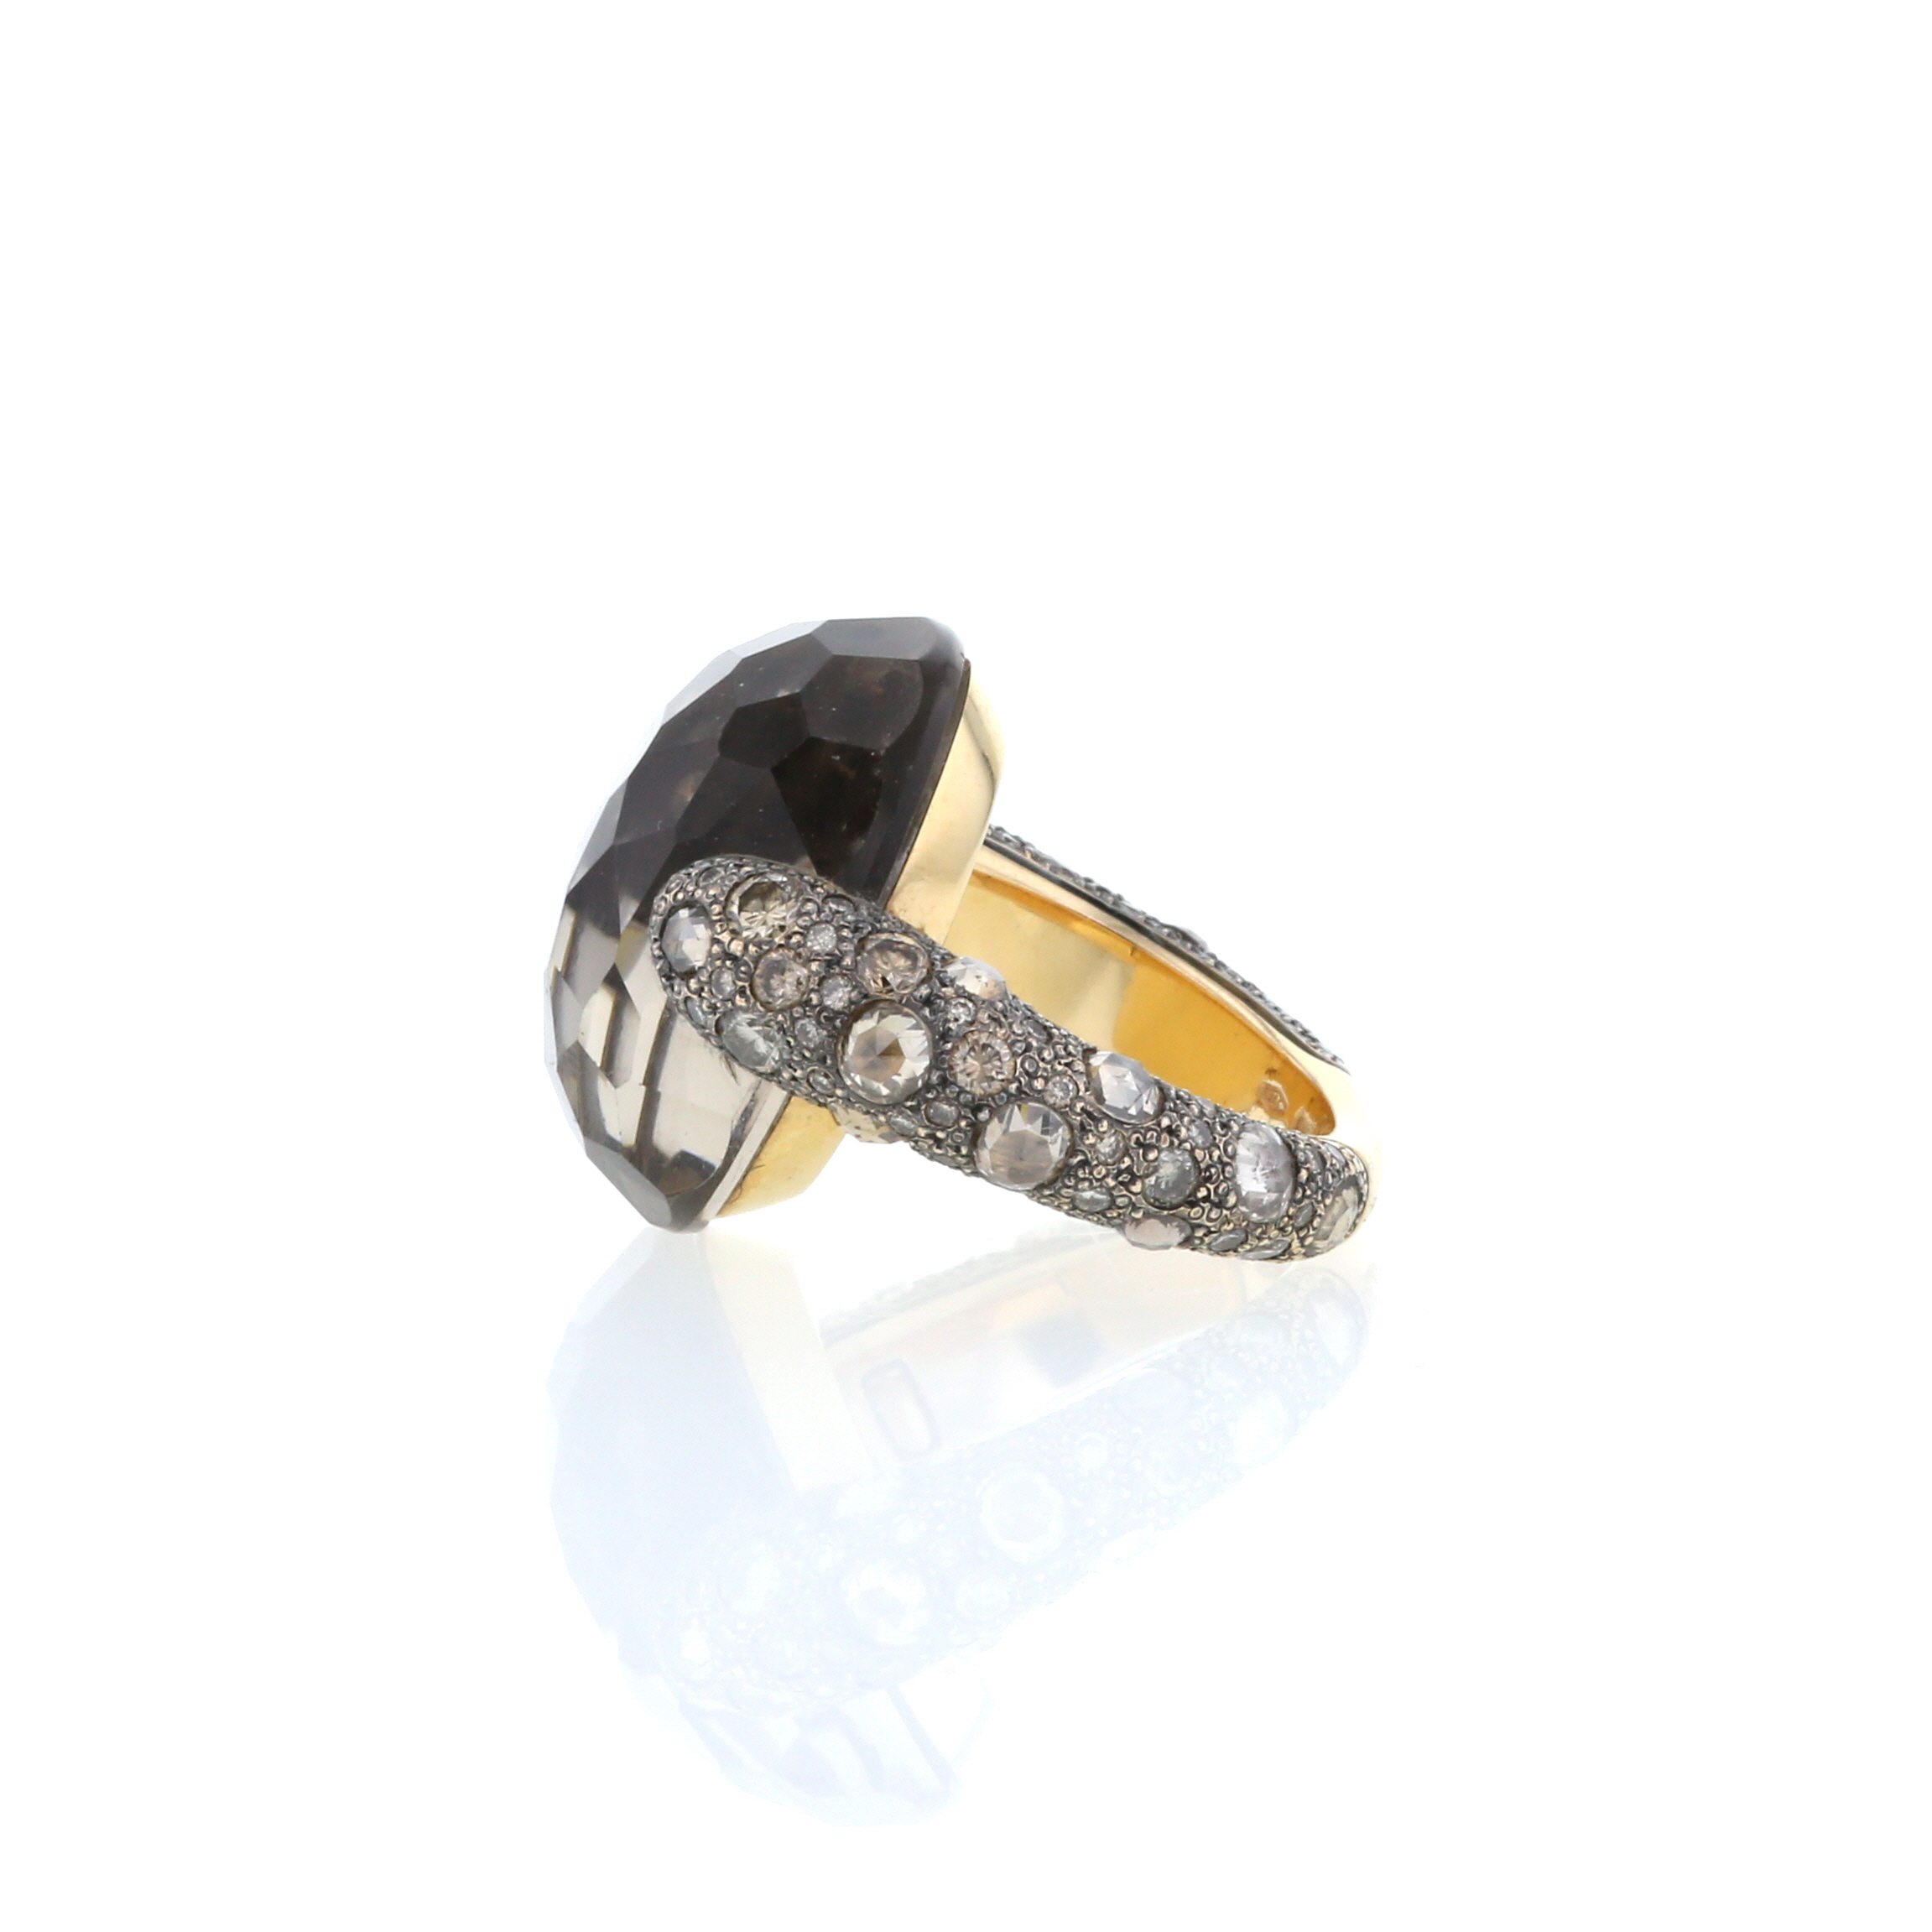 Tango Large Model Ring In Pink Gold, Diamonds And Smoked